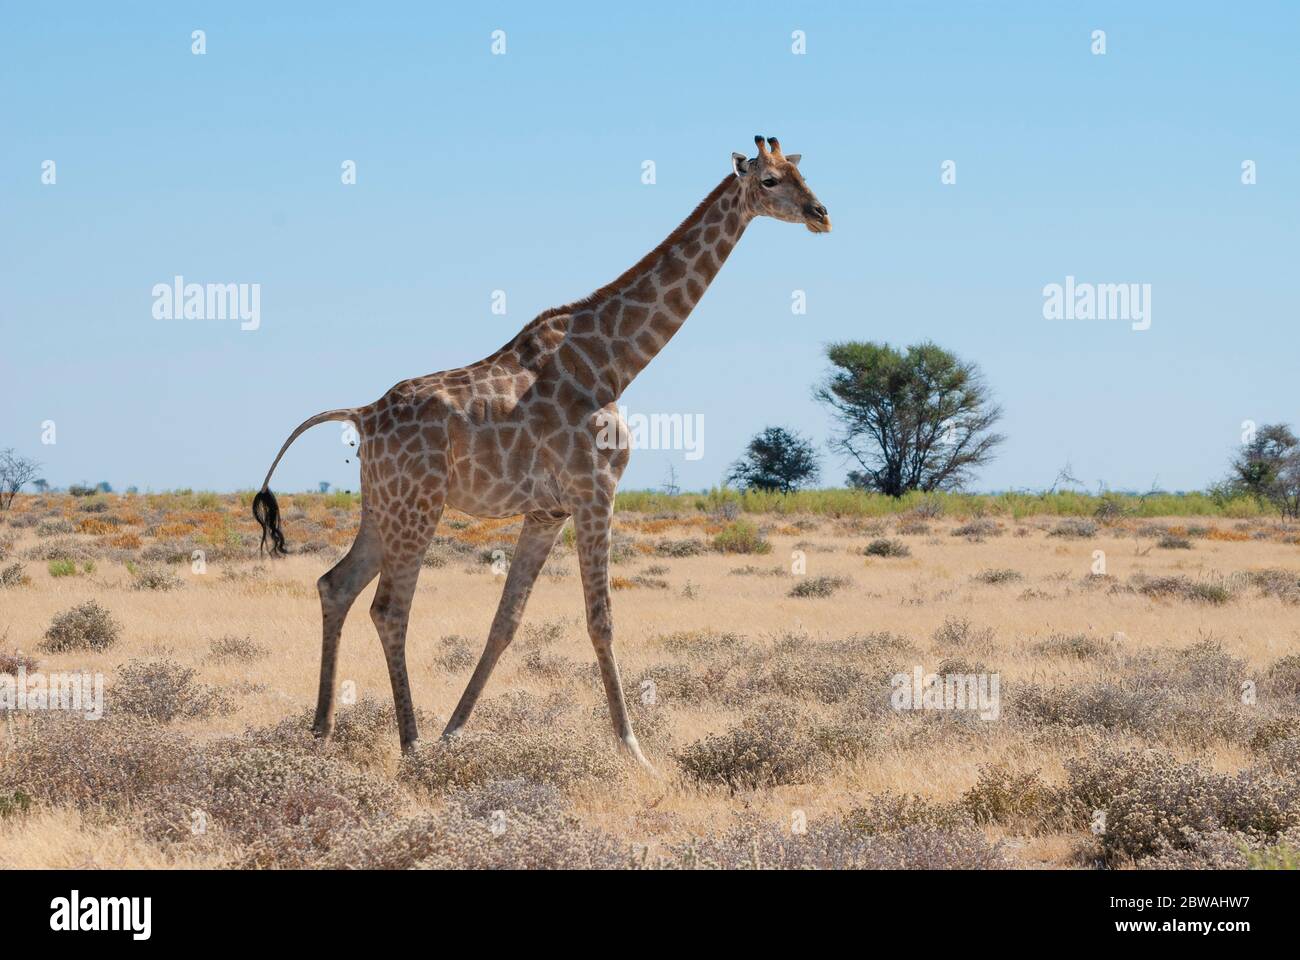 An Angolan giraffe, also known as the Namibian giraffe walking in African grassland. Photographed in Etosha National Park, Namibia. Stock Photo